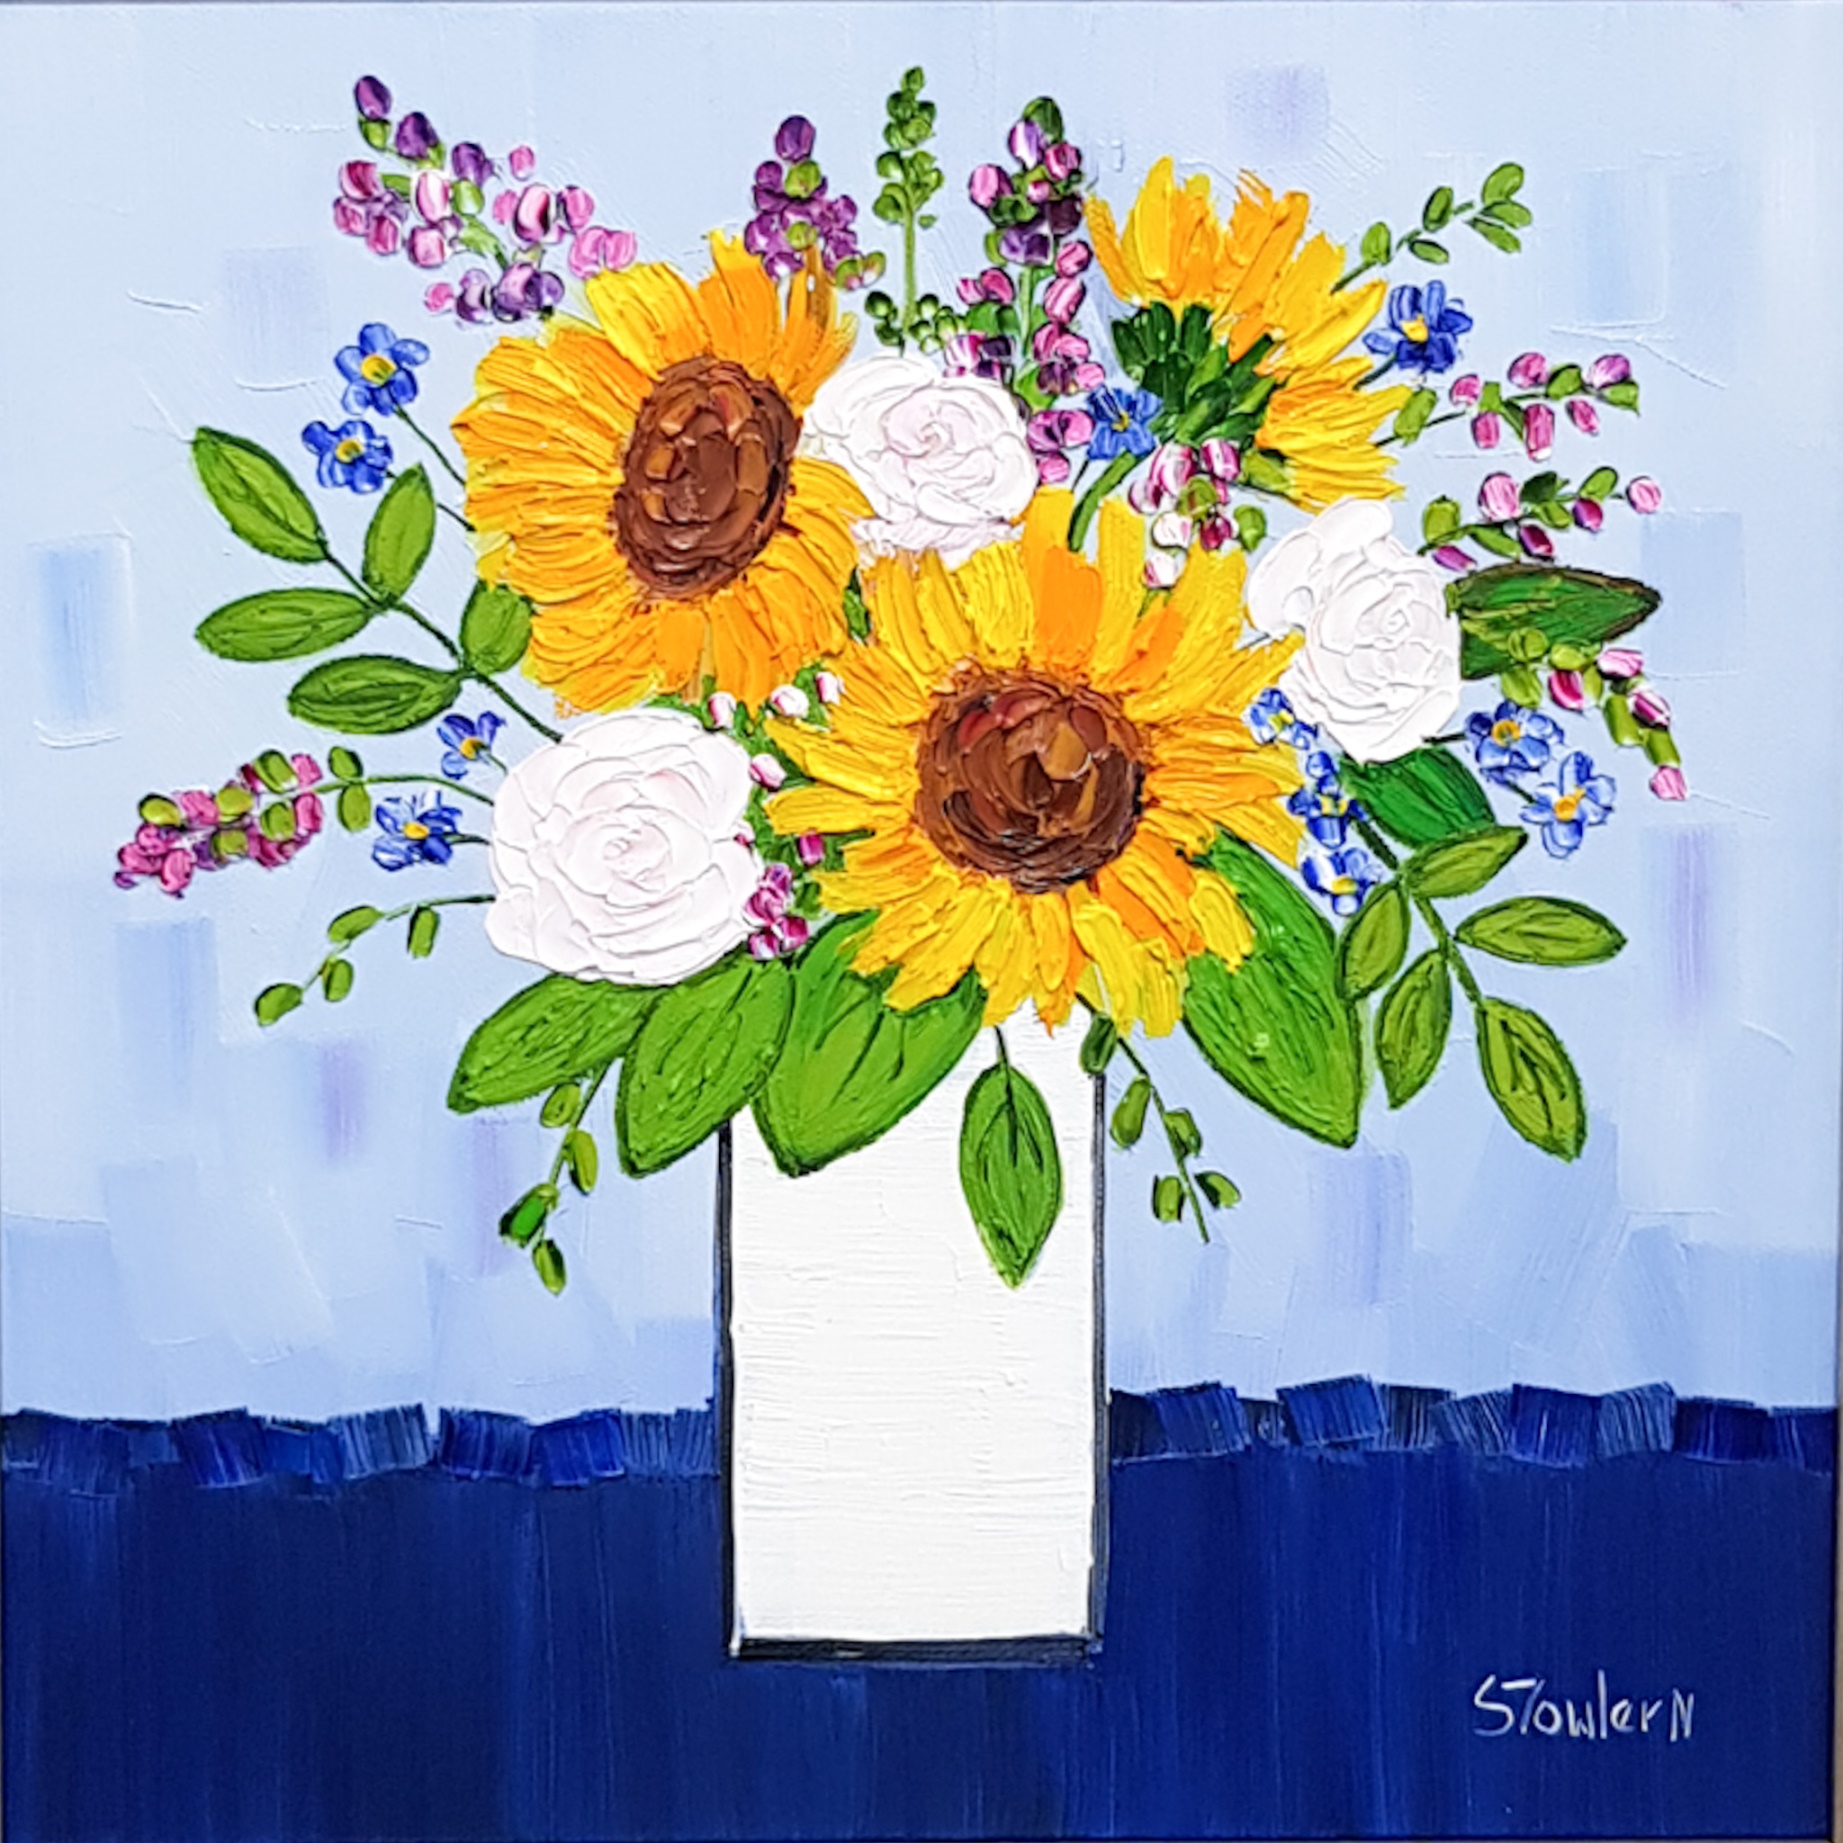 'Sunflowers and White Roses' by artist Sheila Fowler